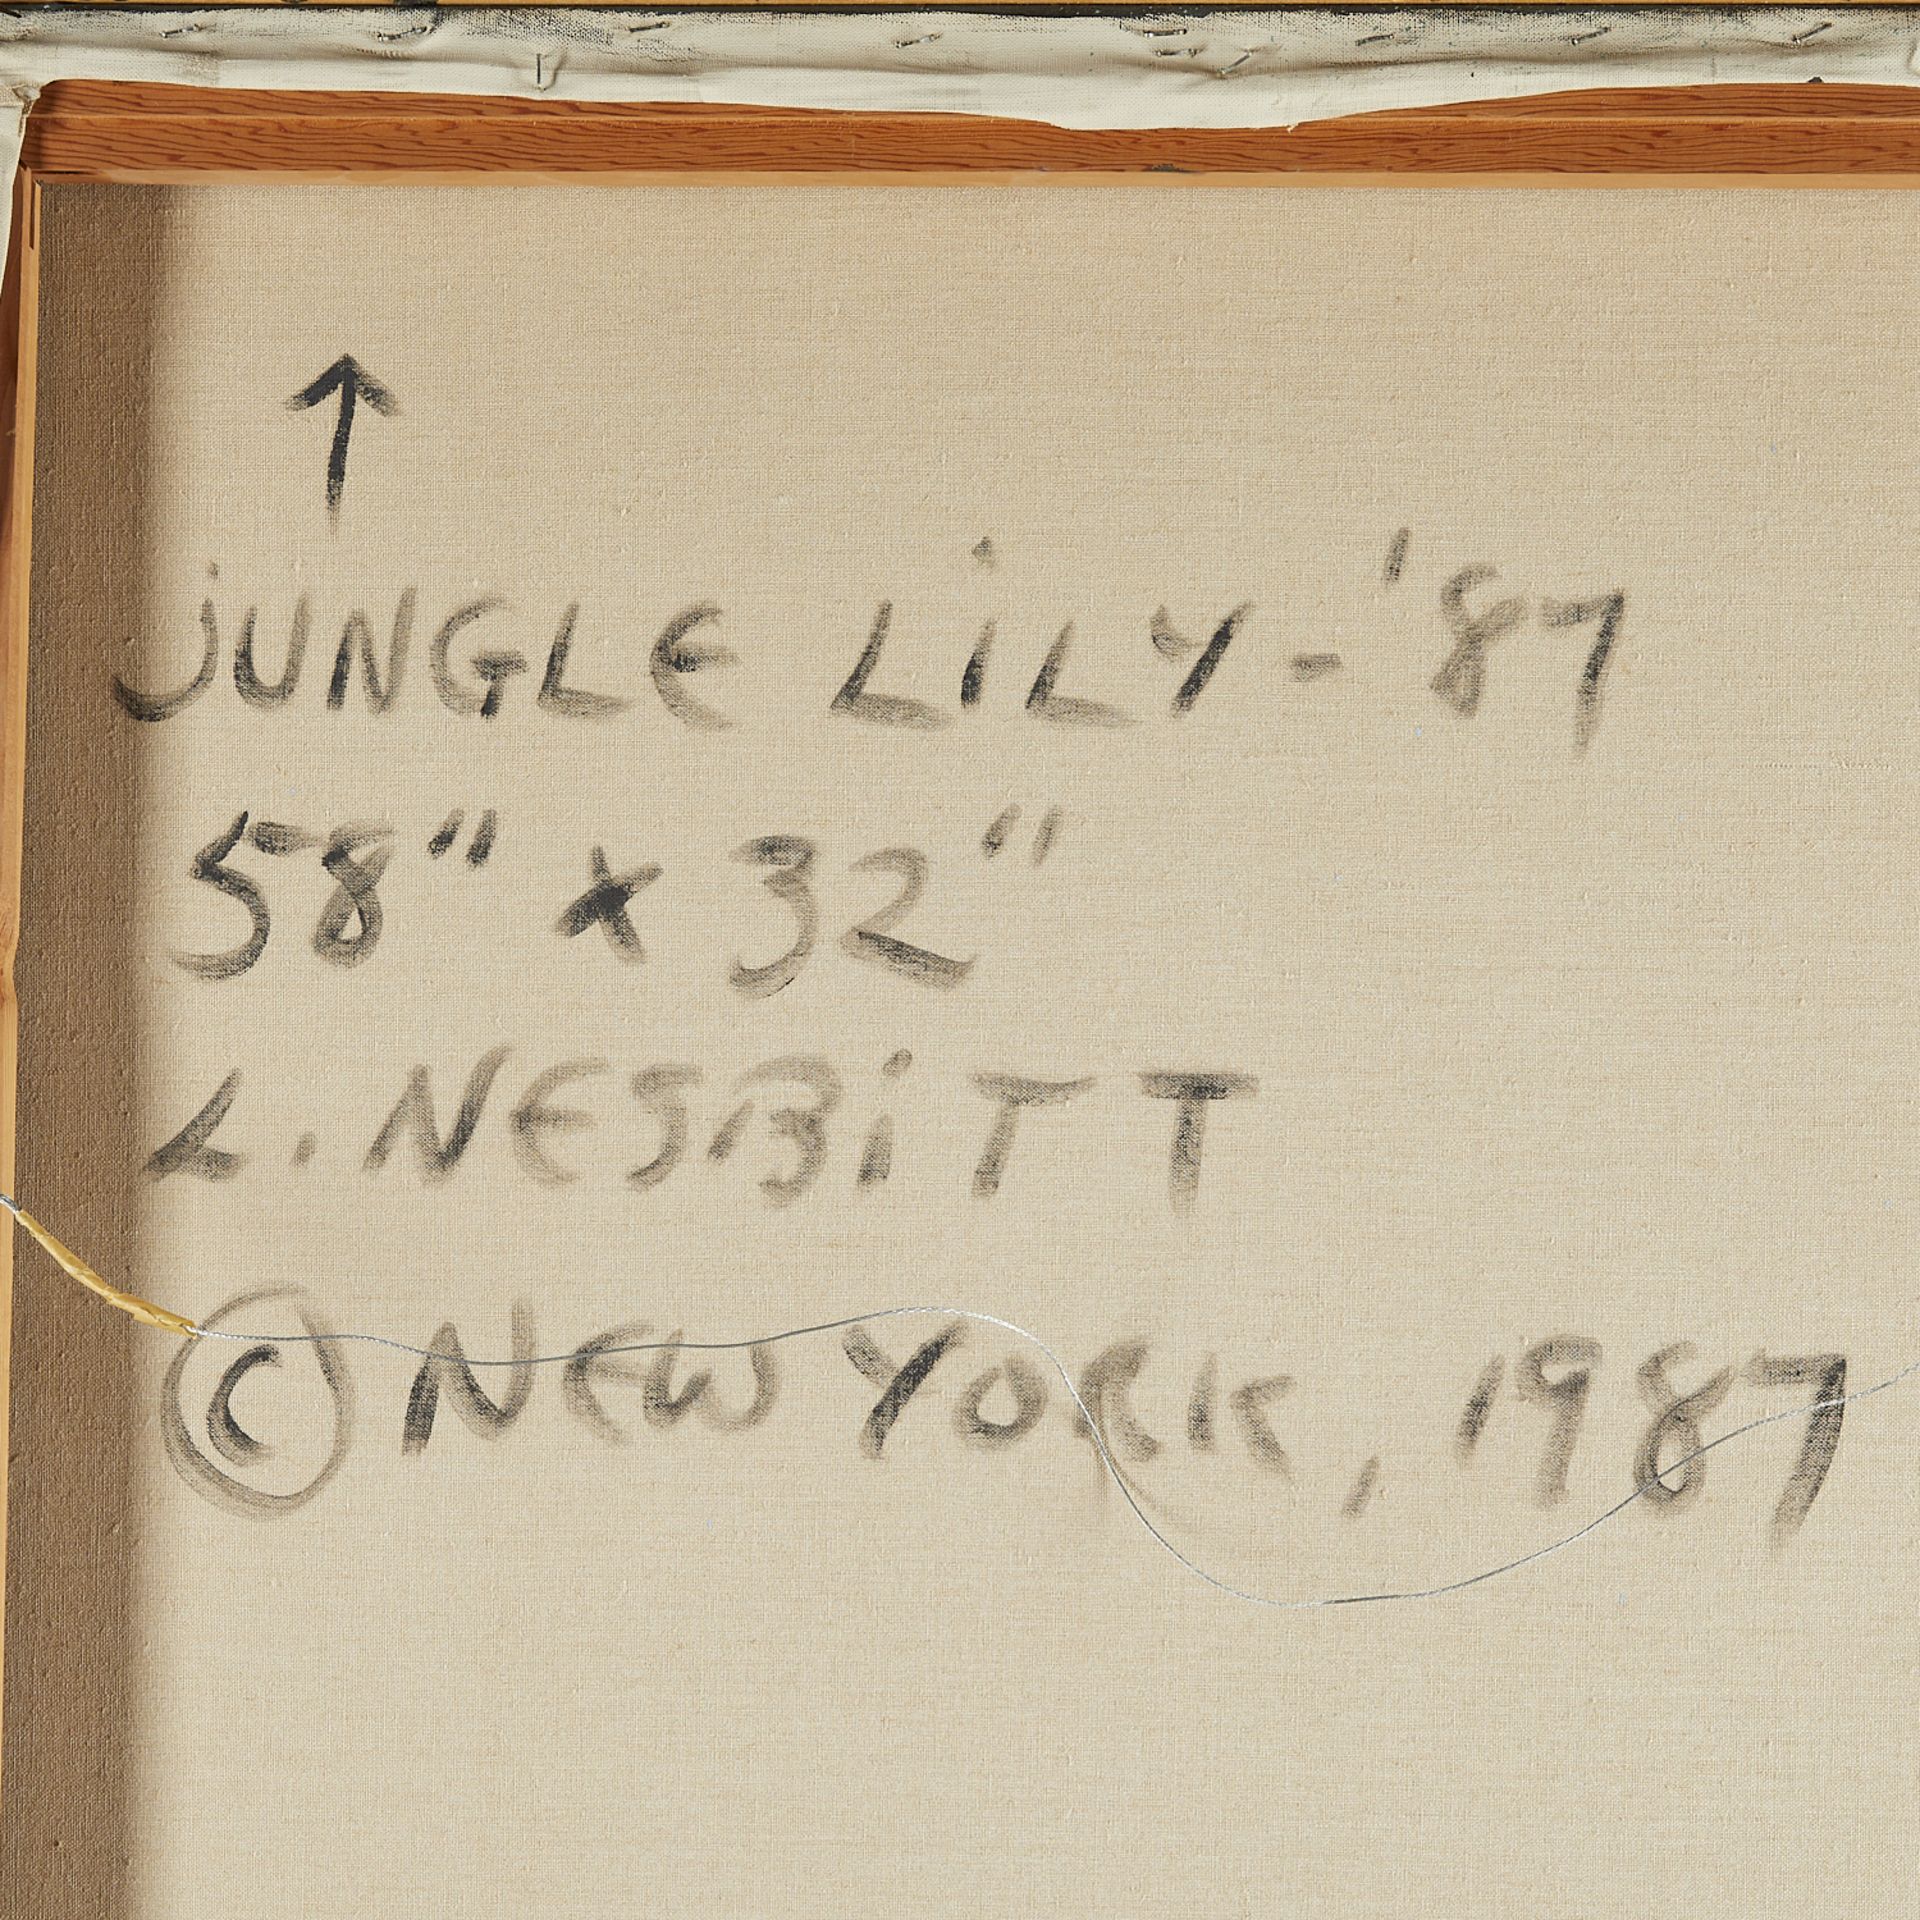 Lowell Nesbitt "Jungle Lily" Oil on Canvas 1987 - Image 6 of 6